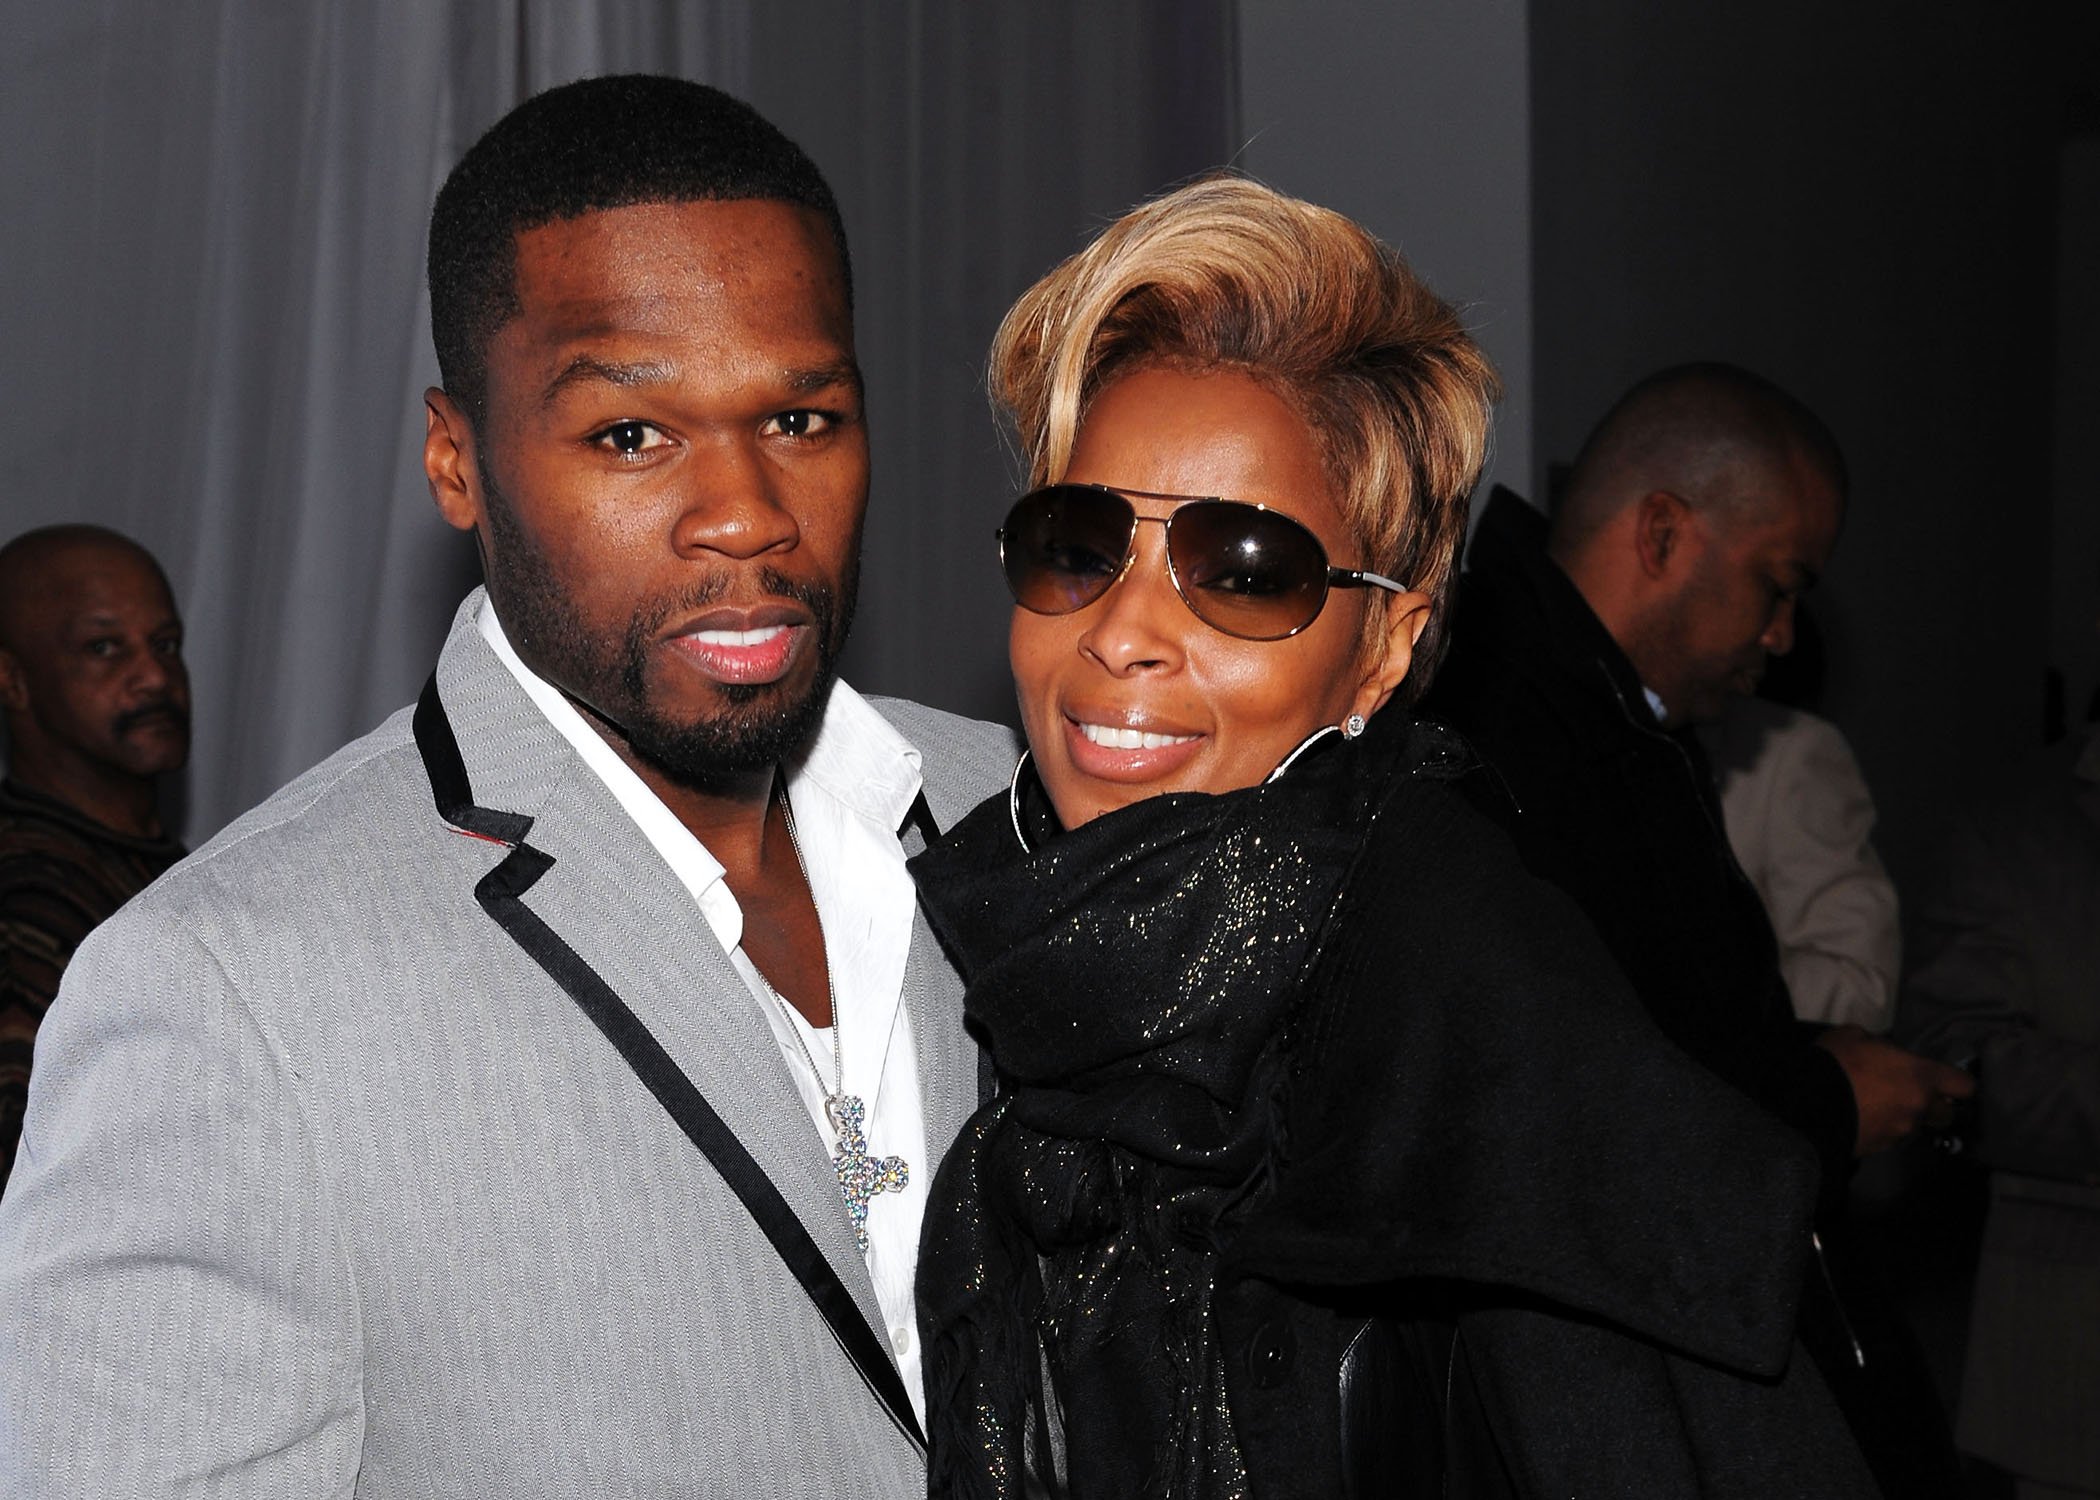 Curtis '50 Cent' Jackson and Mary J. Blige